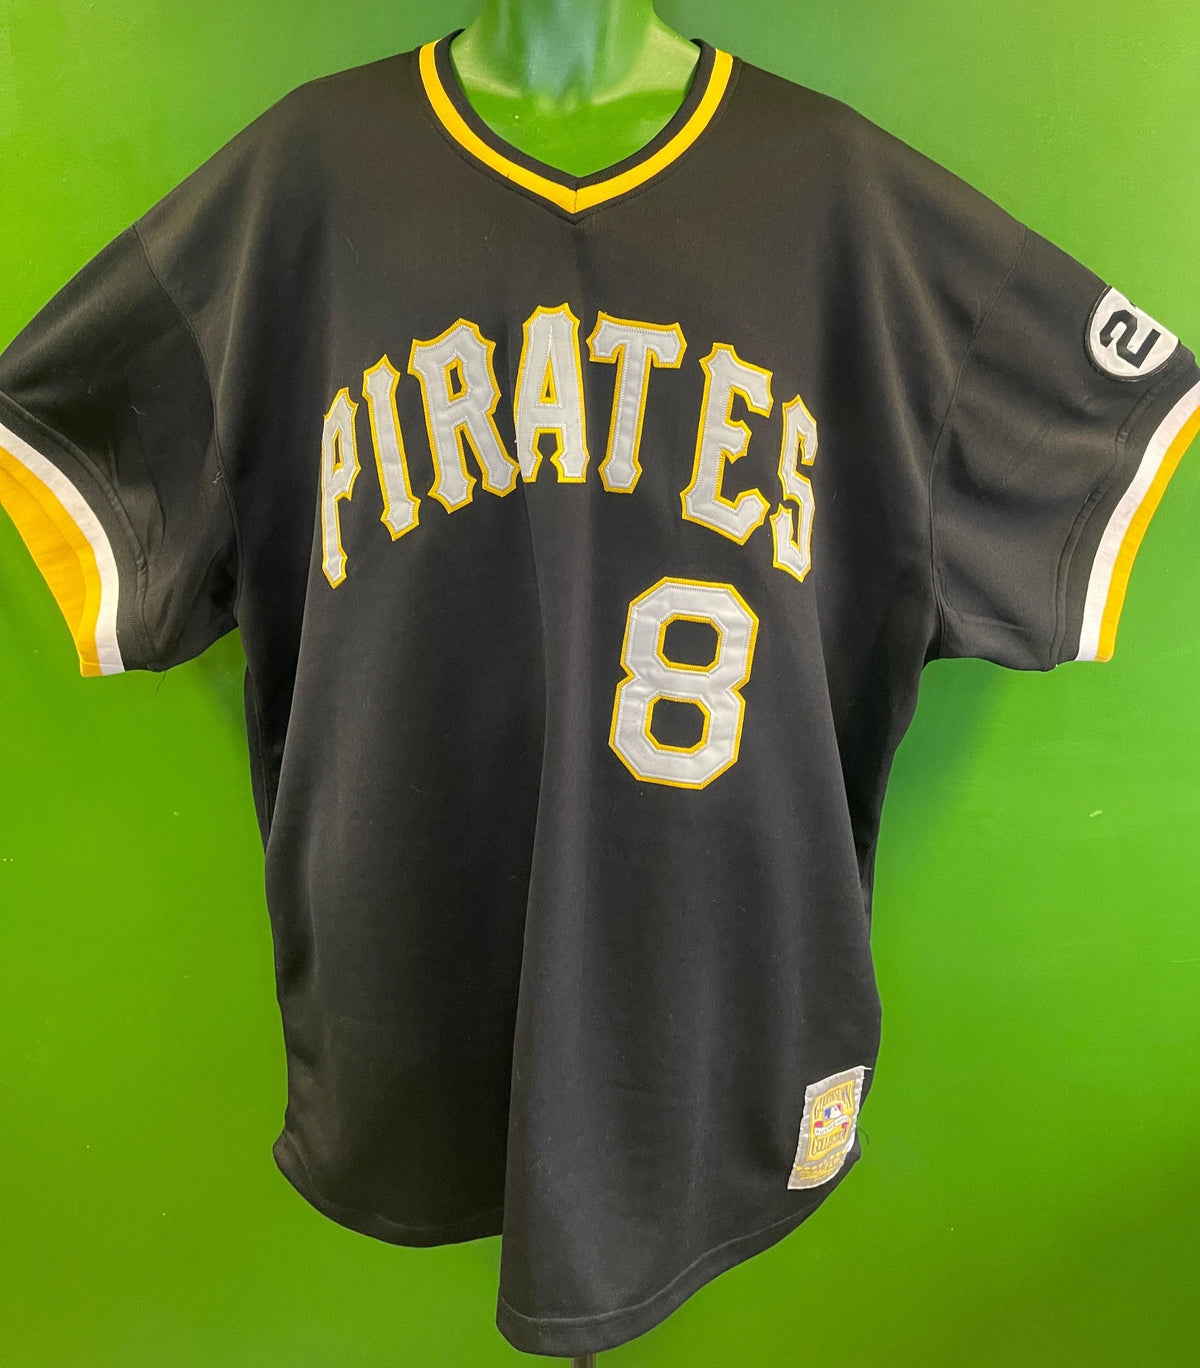 MLB Pittsburgh Pirates Mitchell & Ness 1979 Throwback Jersey Men's 4X-Large NWT